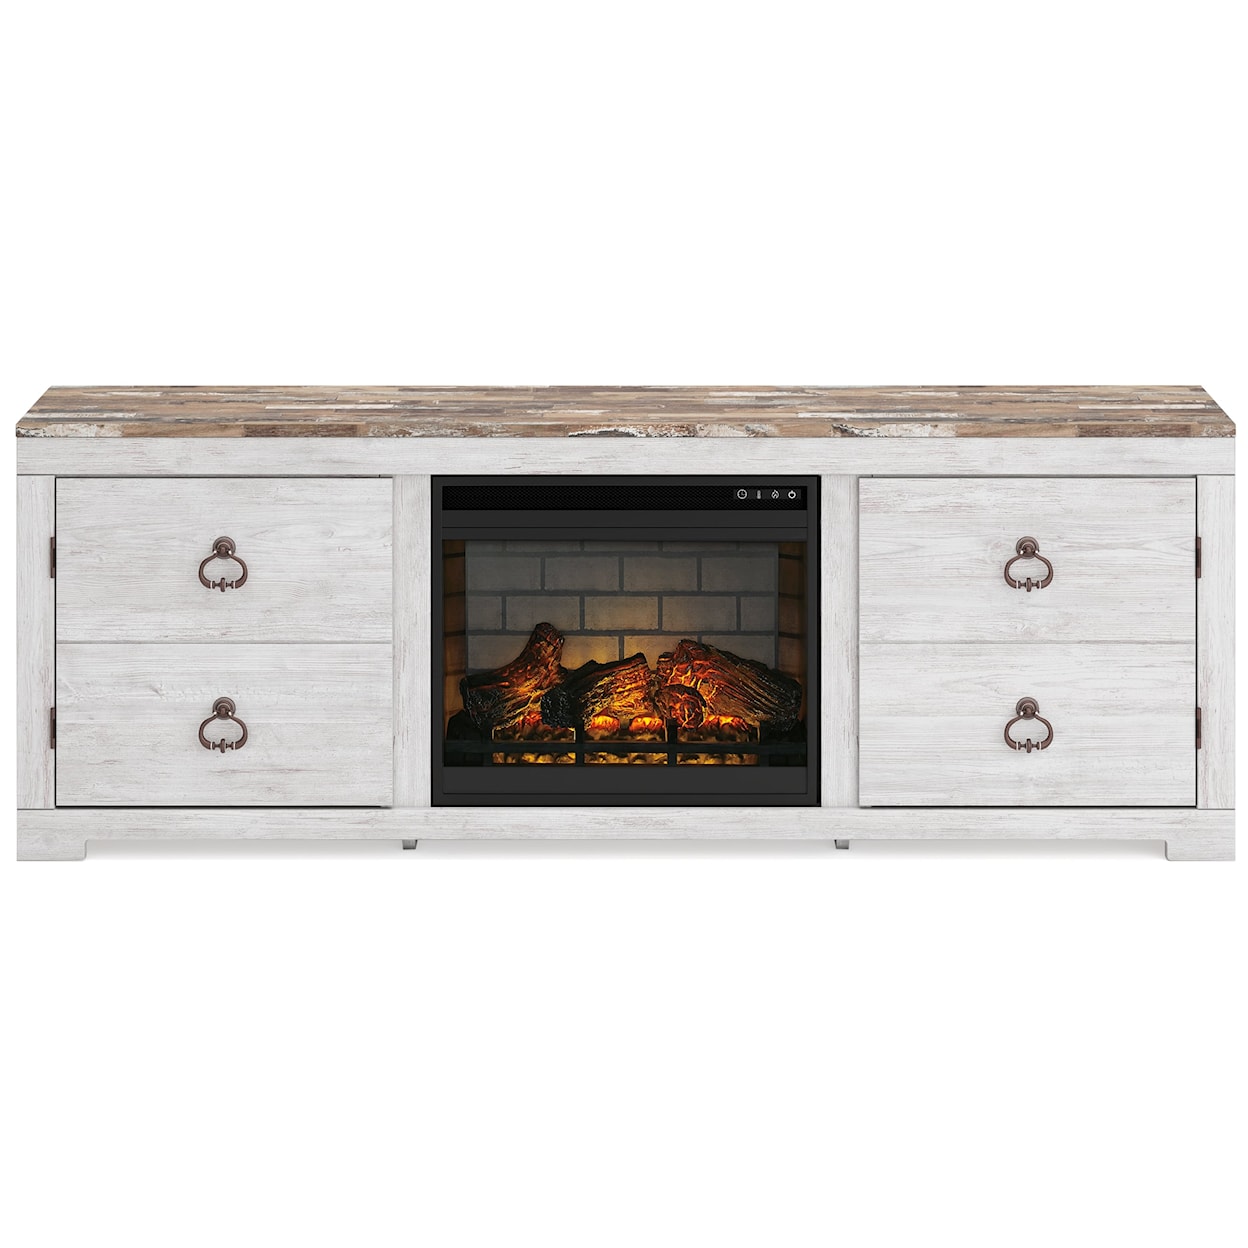 StyleLine Haydyn 72" TV Stand with Electric Fireplace